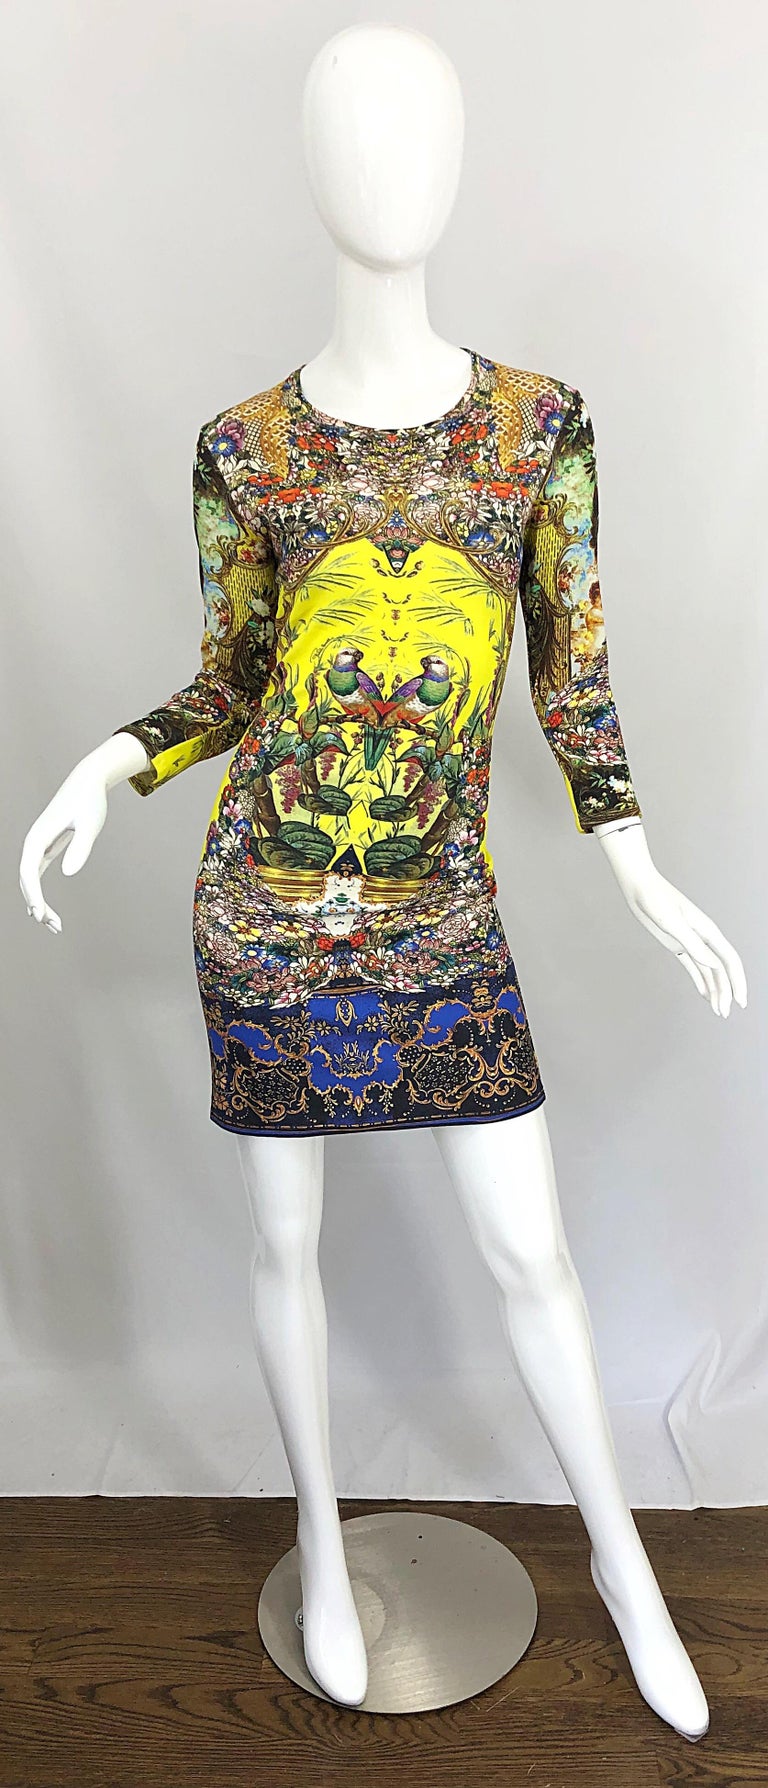 Incredible ROBERTO CAVALLI early 2000s bright yellow Plato novelty print 3/4 sleeve rayon jersey dress! Features flowers and bids printed throughout. Simply slips over the head, and stretches to fit. Can easily be worn day or evening. Perfect with